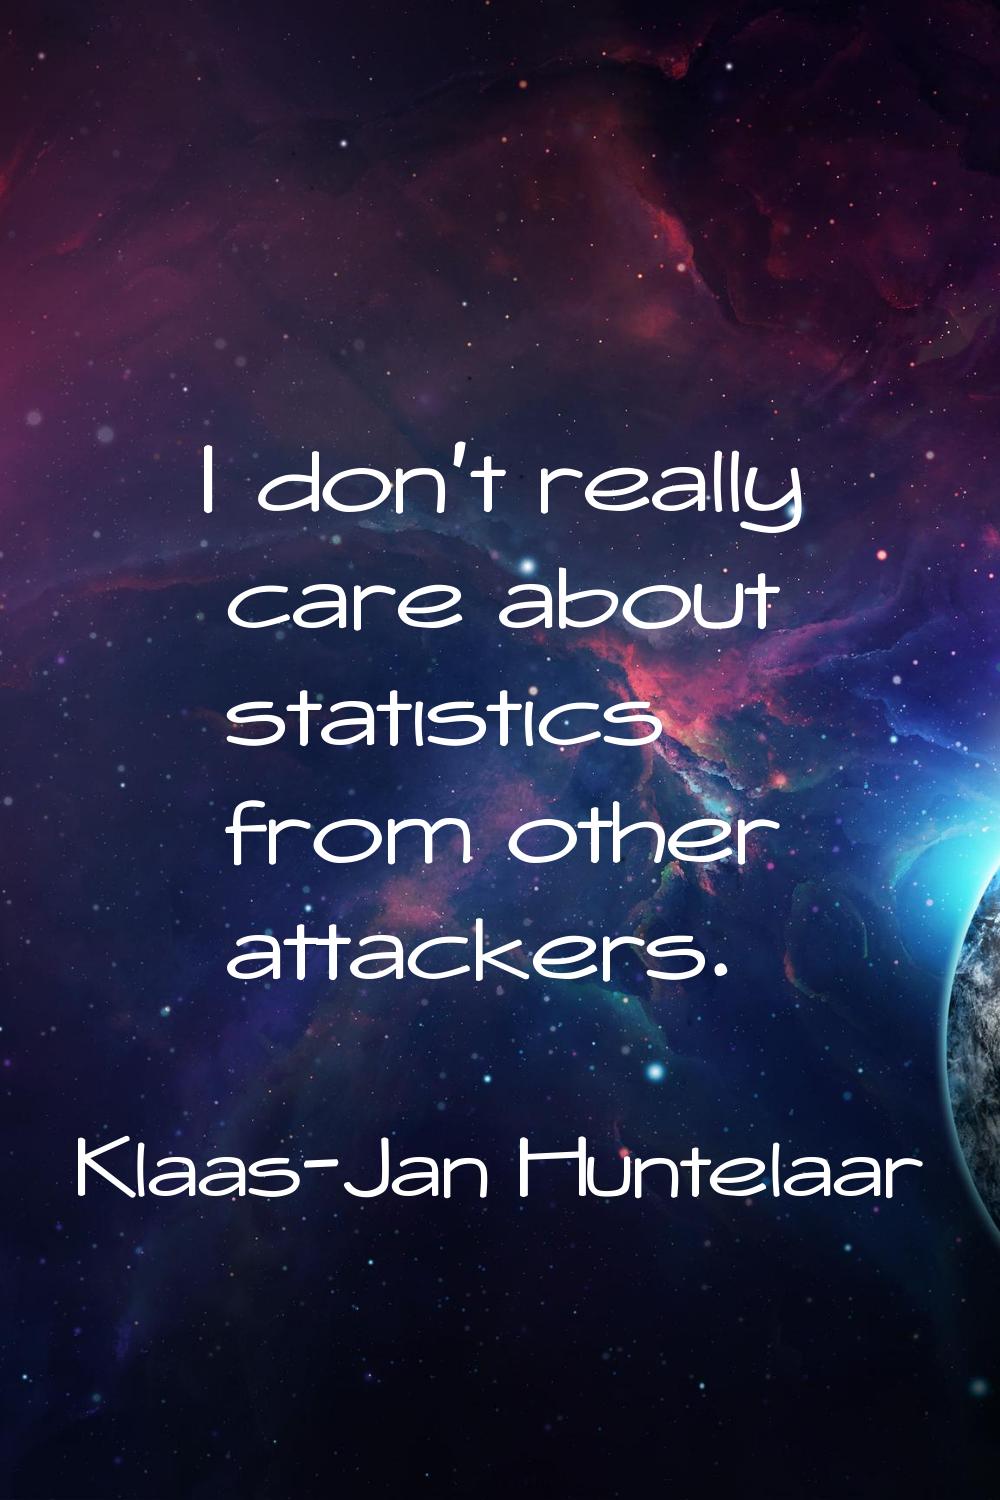 I don't really care about statistics from other attackers.